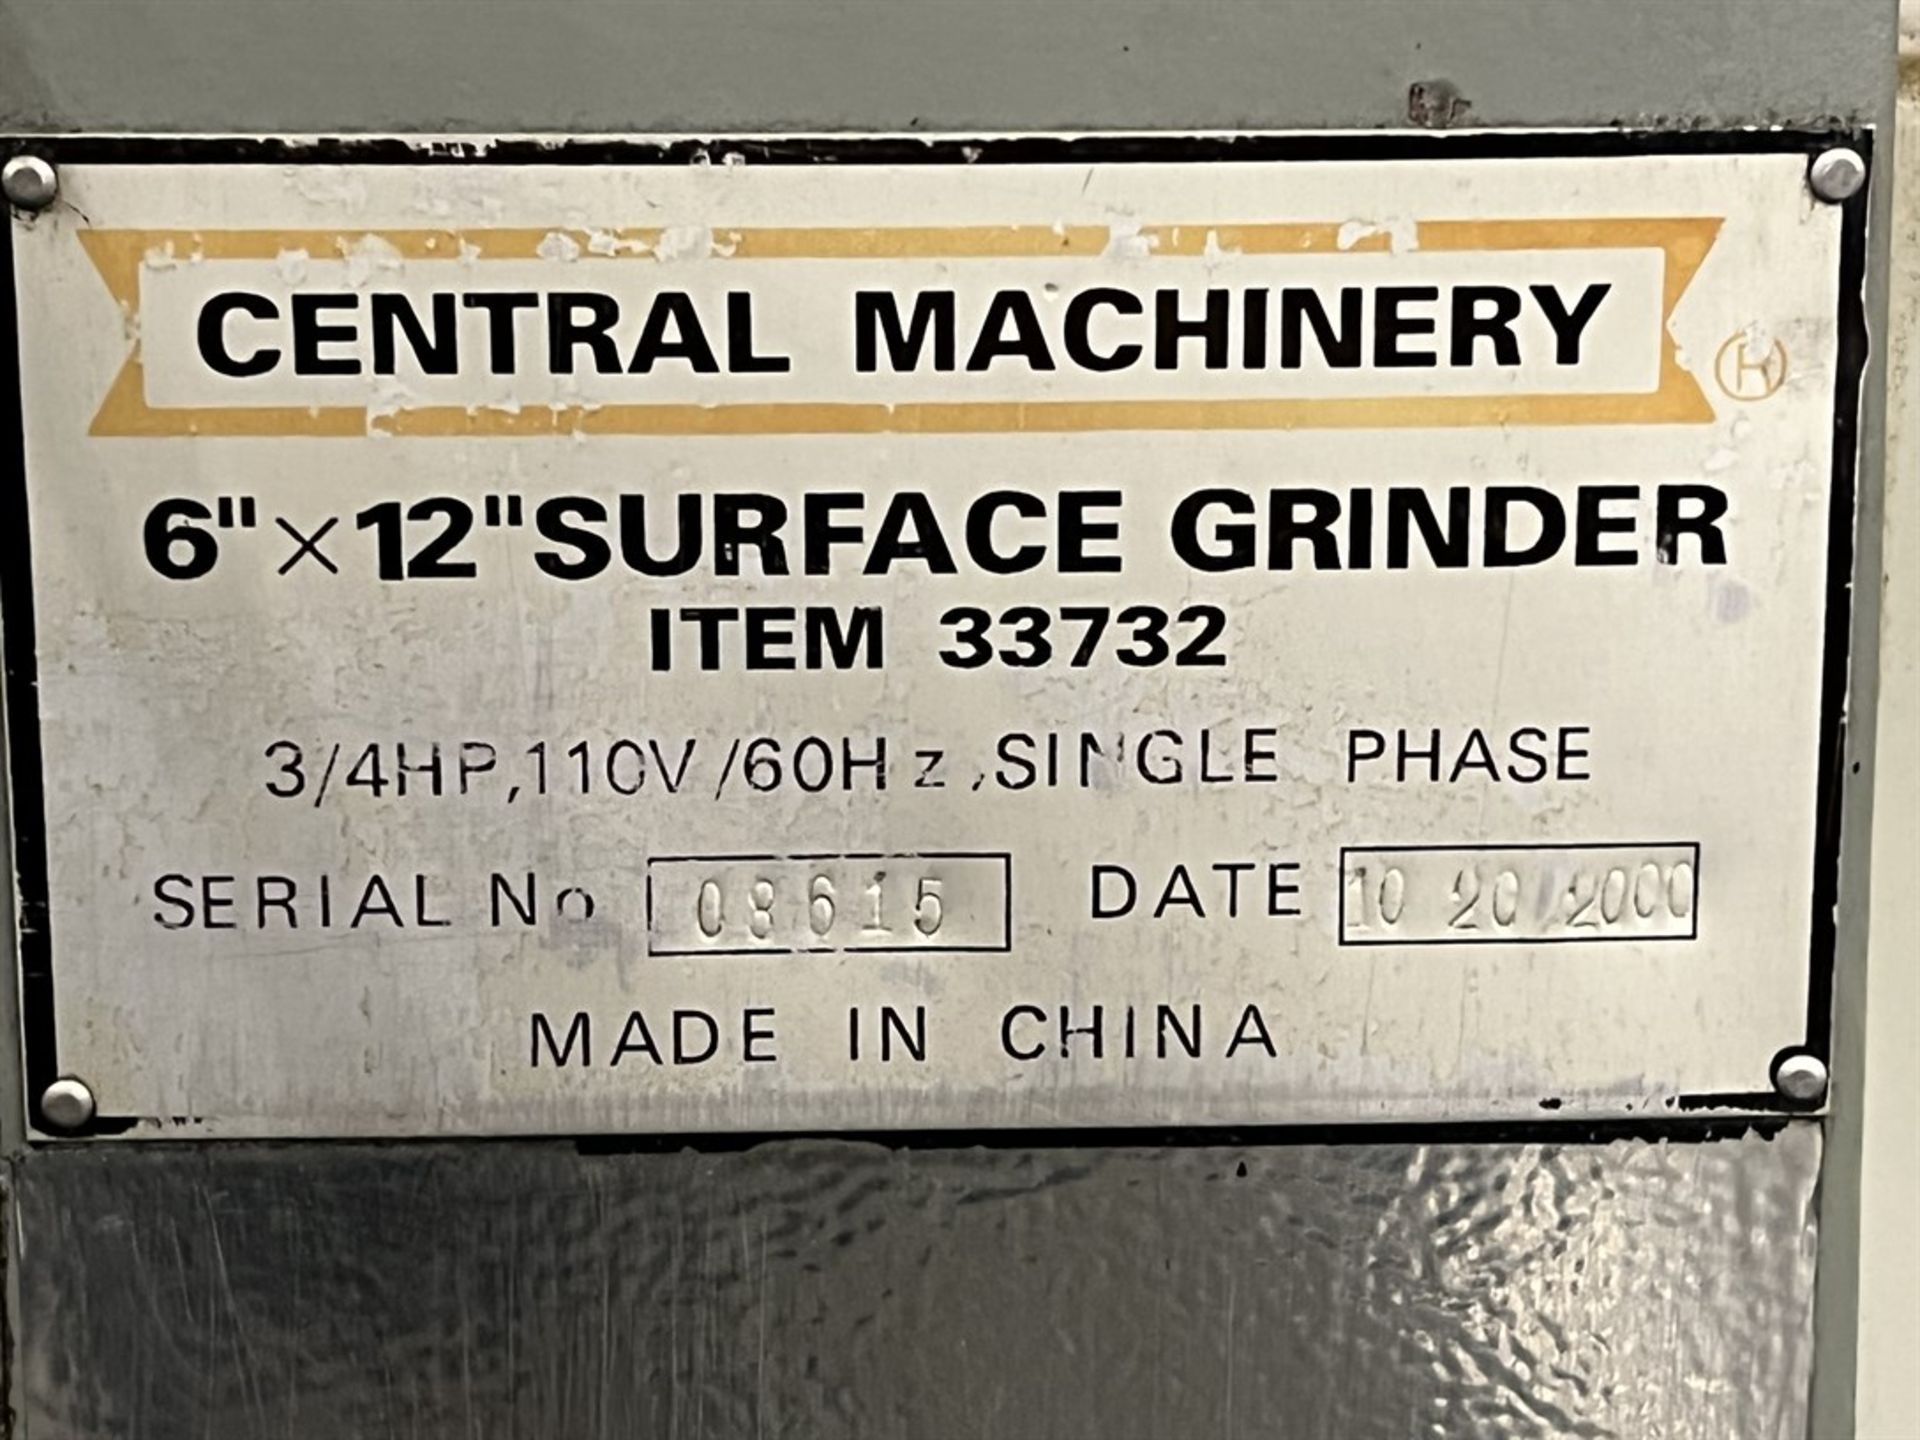 CENTRAL MACHINERY 33732 6” x 12” Surface Grinder, s/n 08615, w/ Cen-Tech Magnetic Chuck - Image 5 of 5